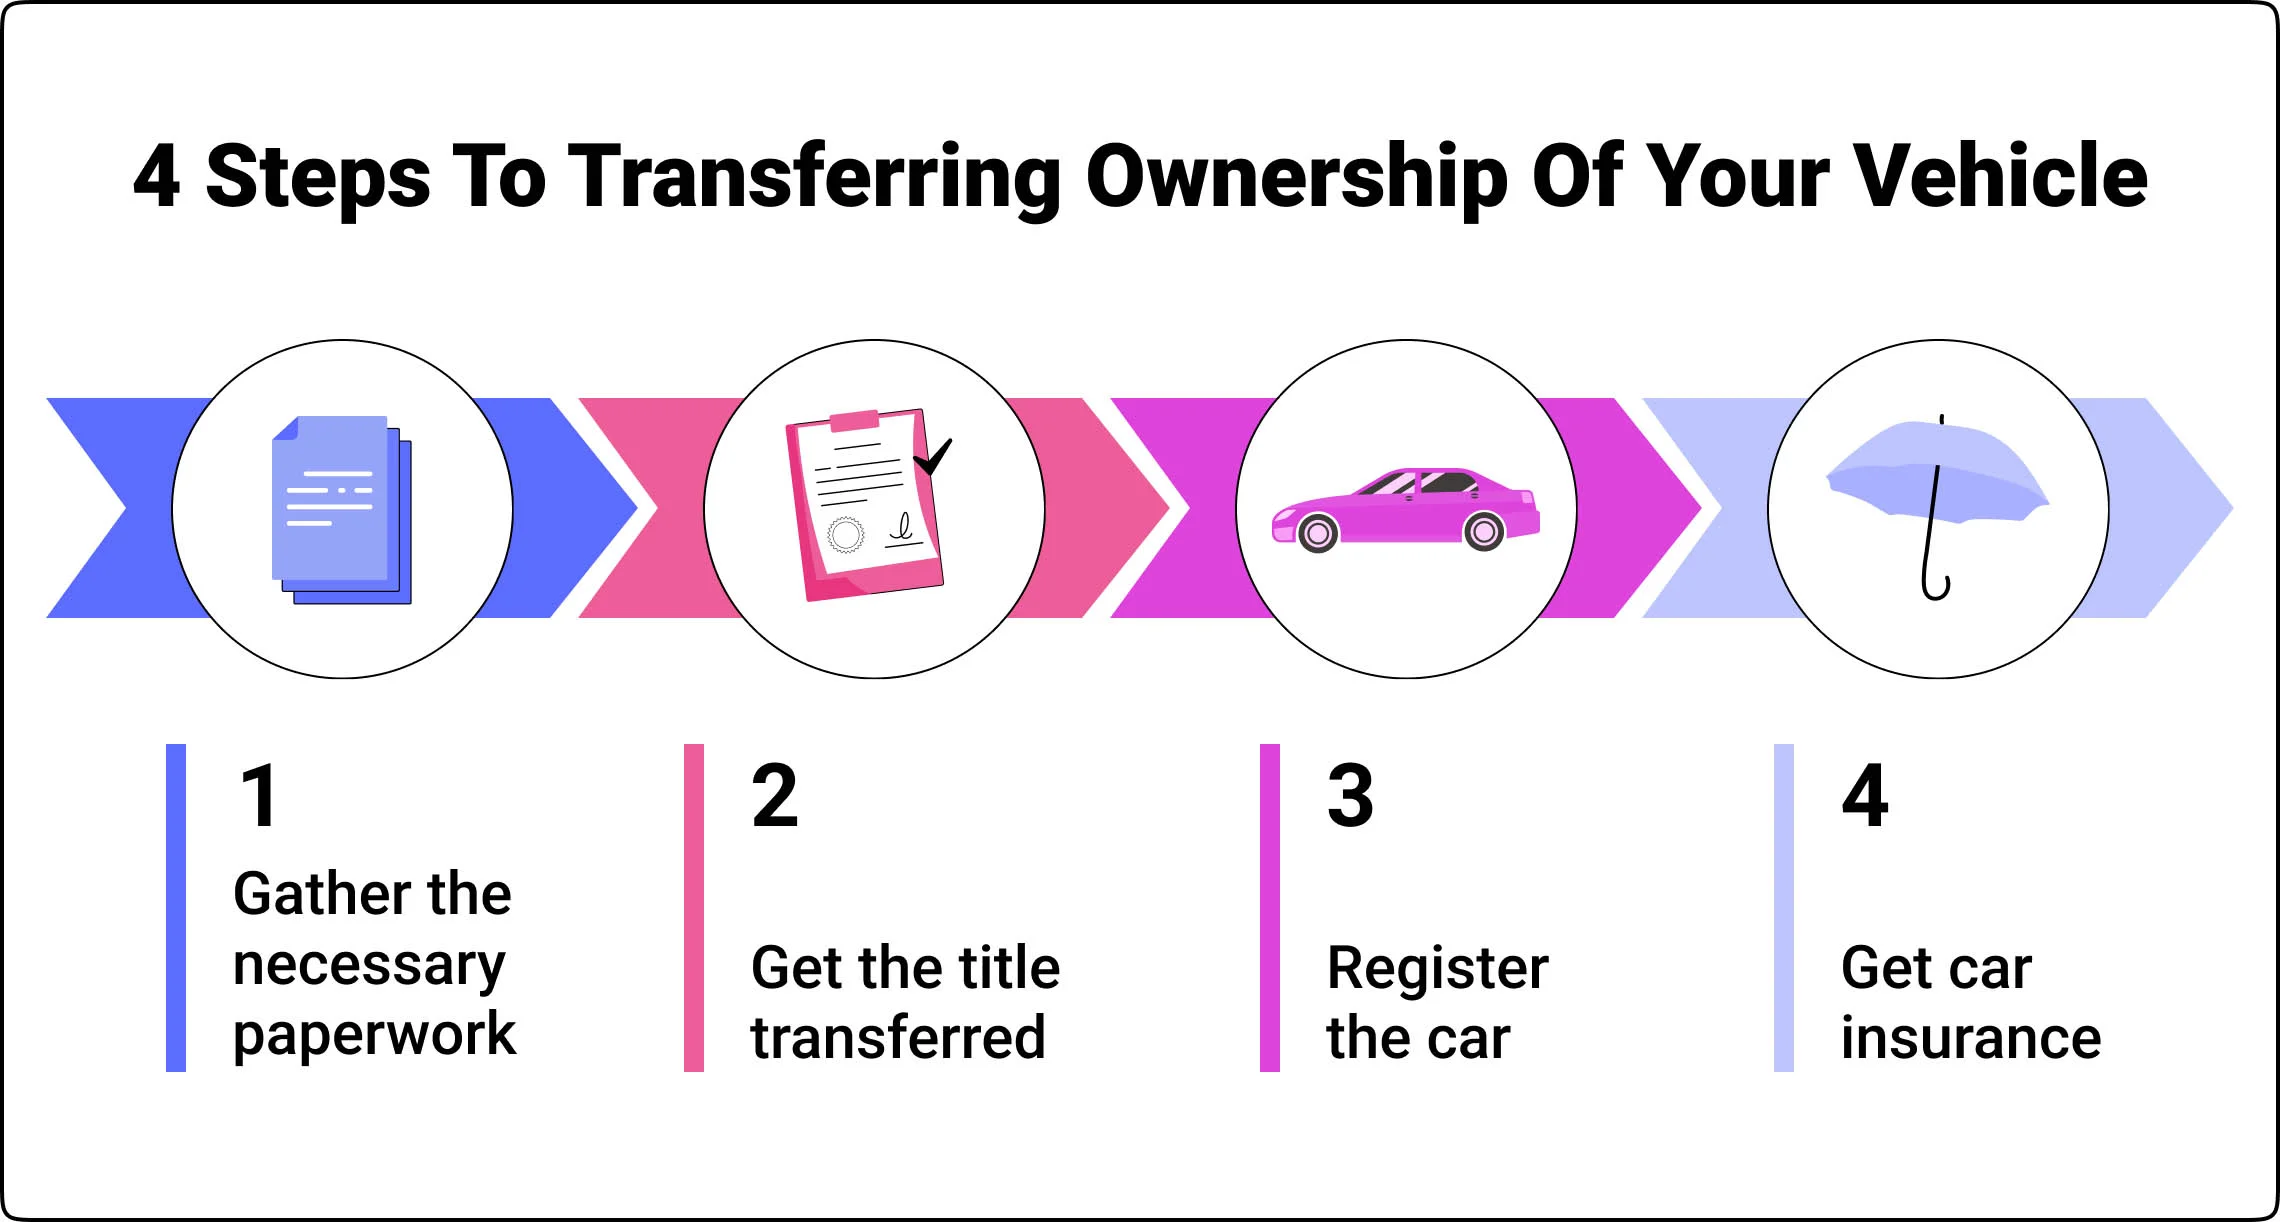 Transfer ownership of your vehicle